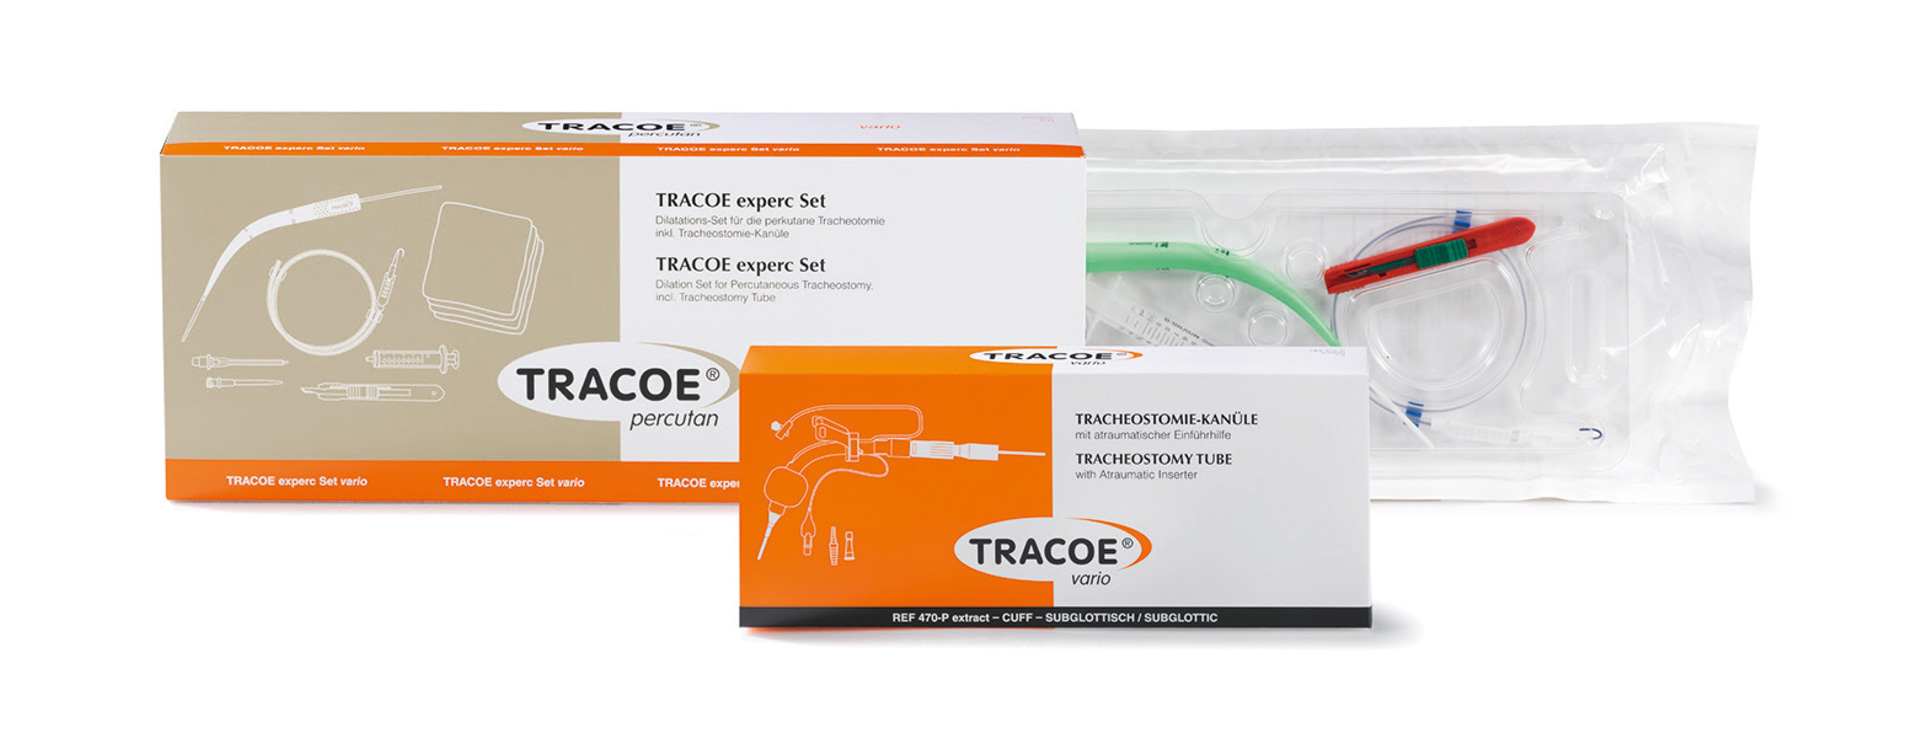 The Tracoe Experc Set packaging for Vario and Vario XL.